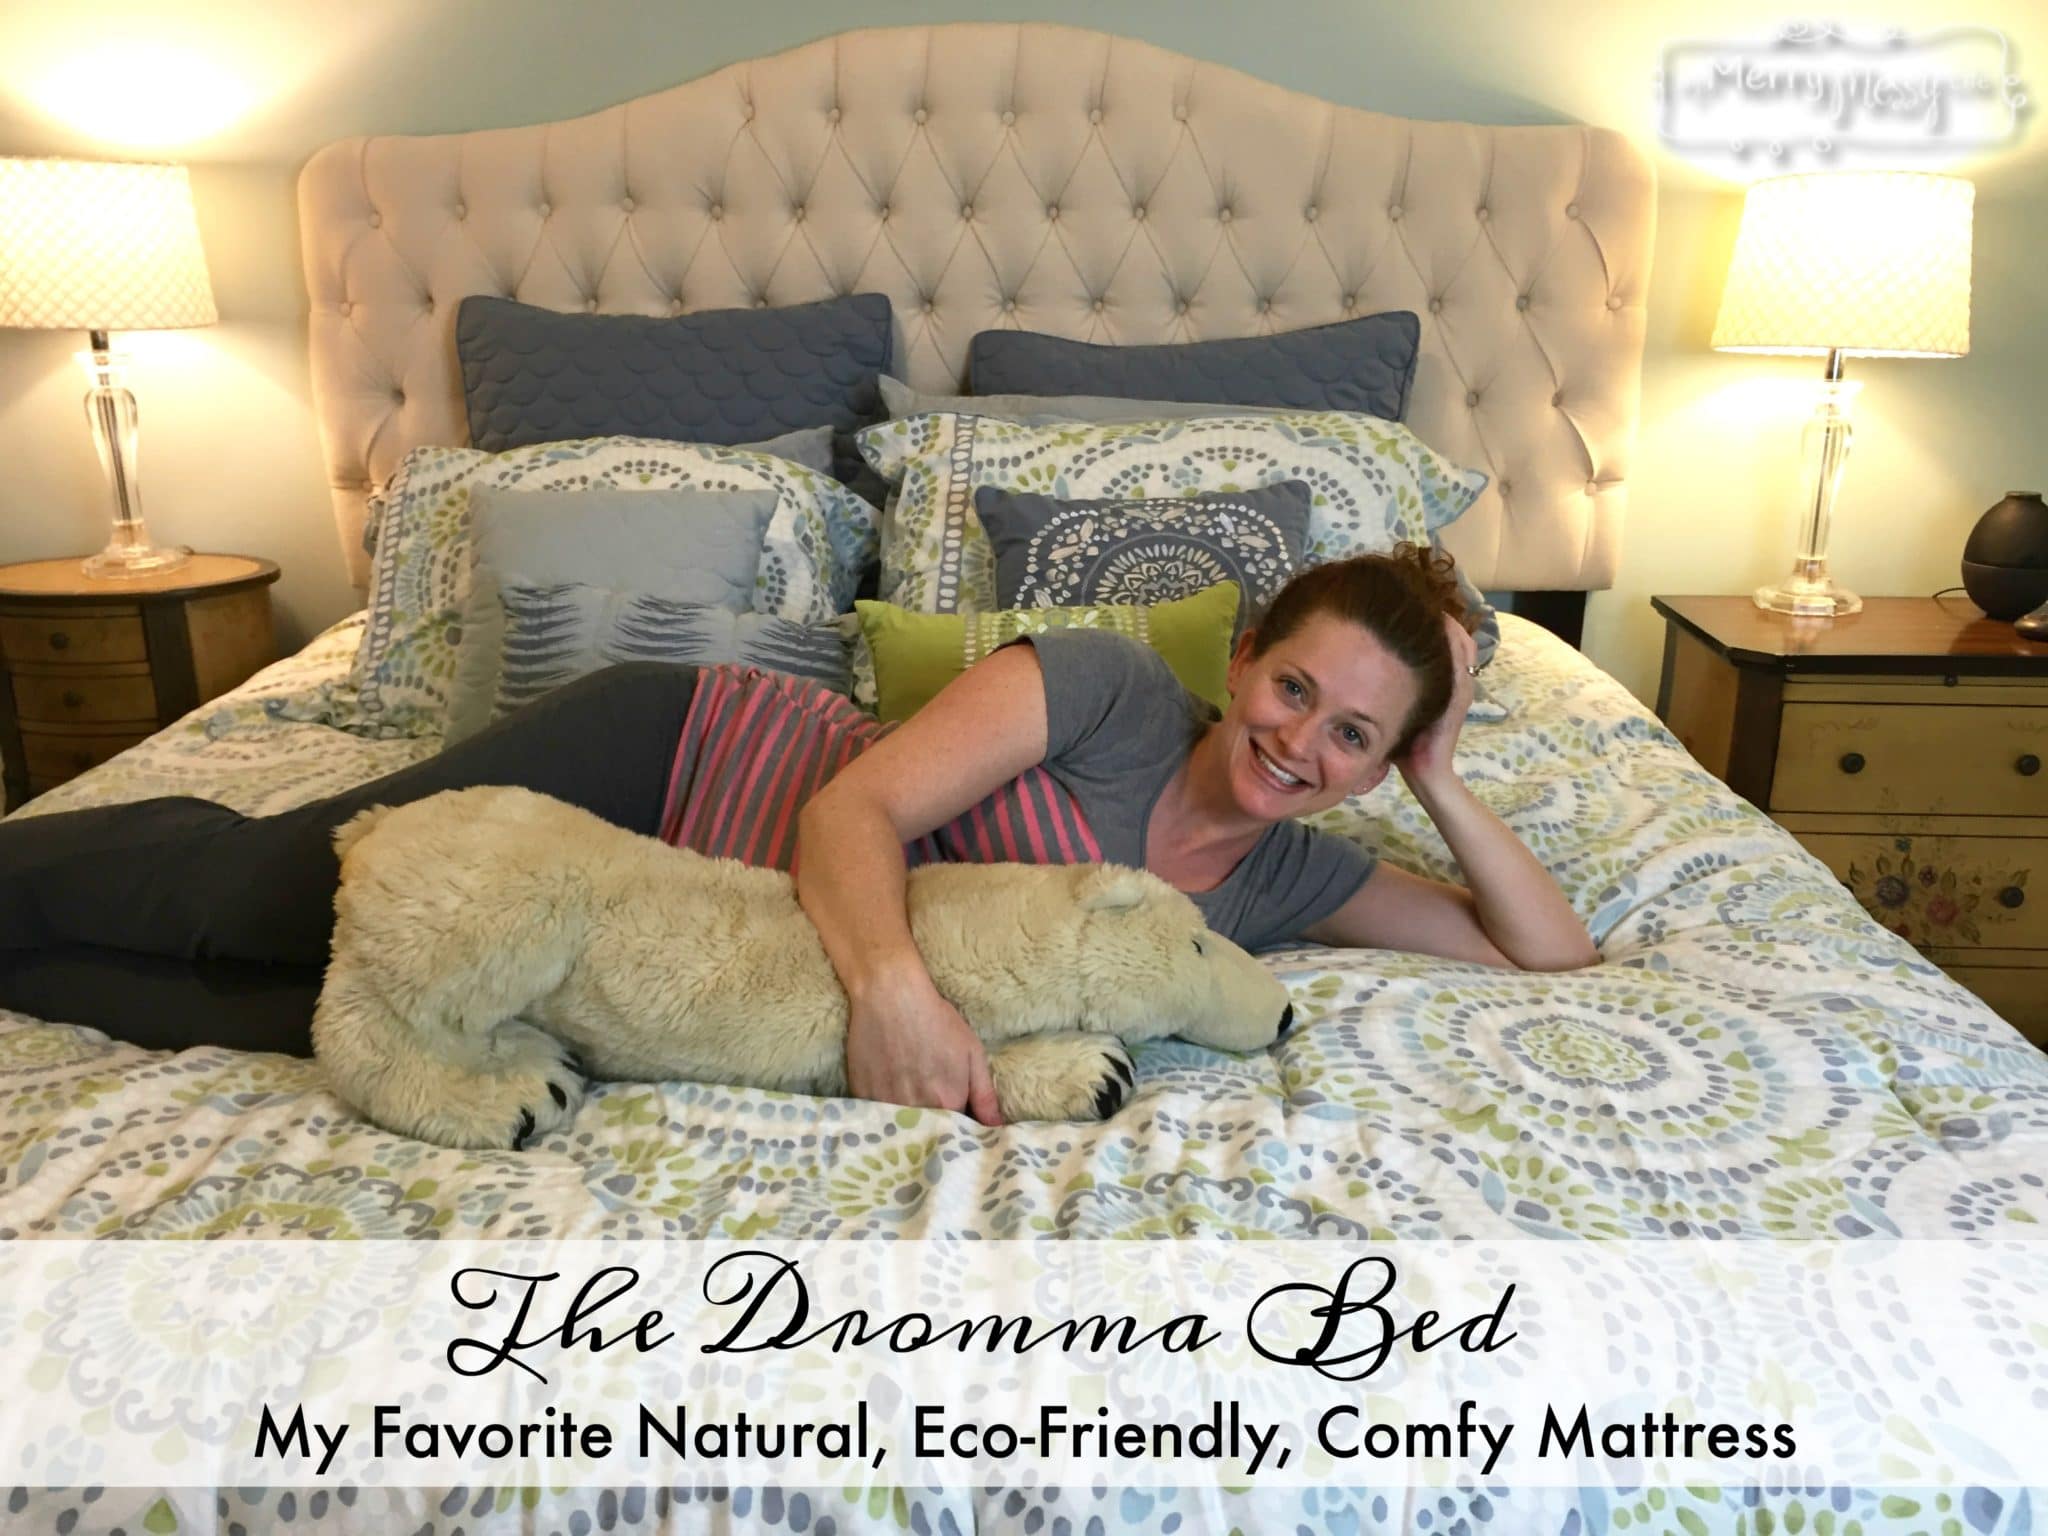 The Dromma Bed - My Favorite Natural, Eco-Friendly Comfy Mattress